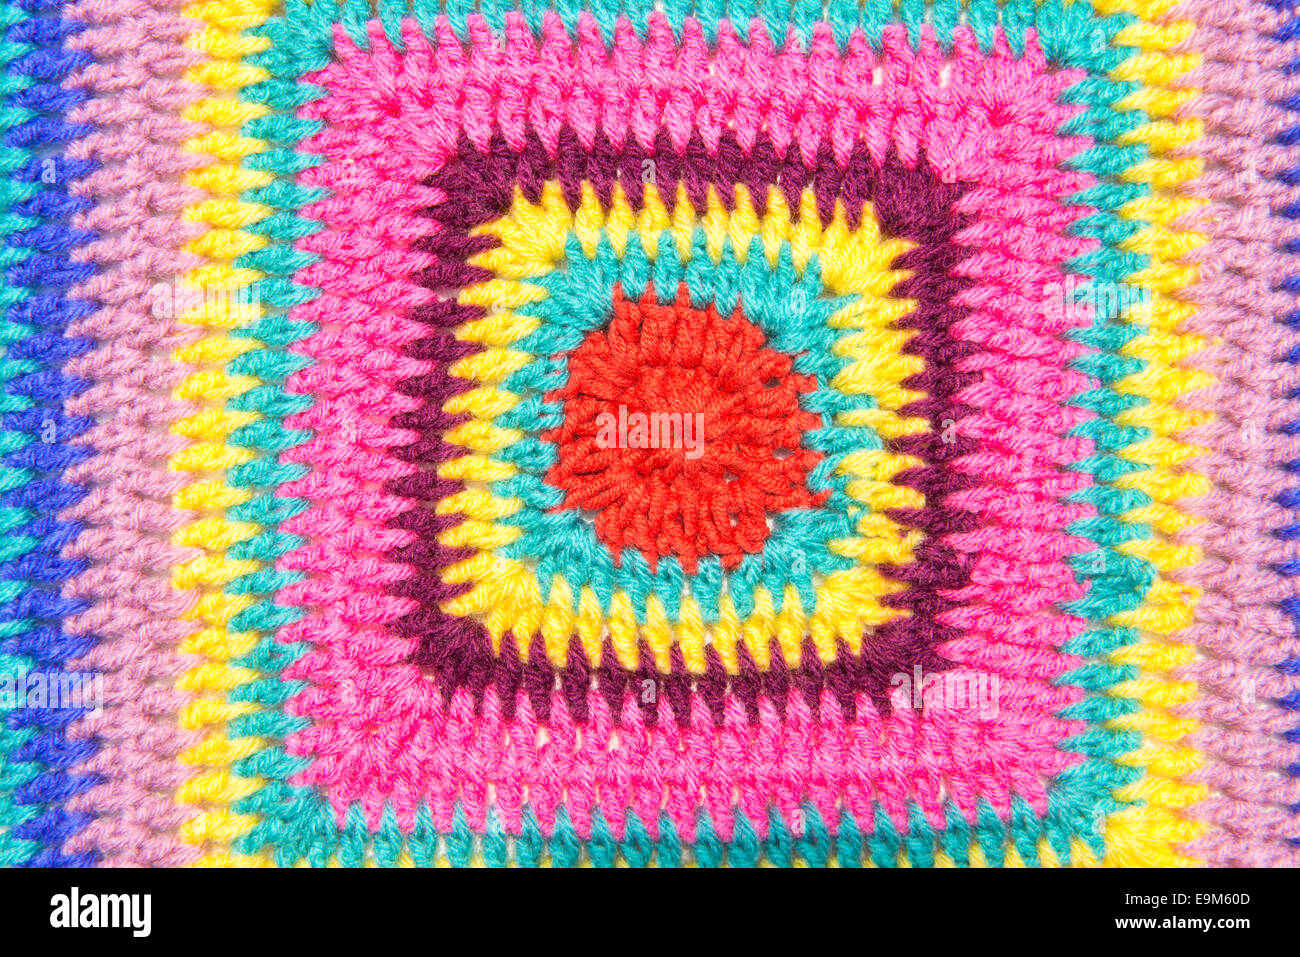 Colseup of crochet colorful fabric pattern. Homemade. Stock Photo